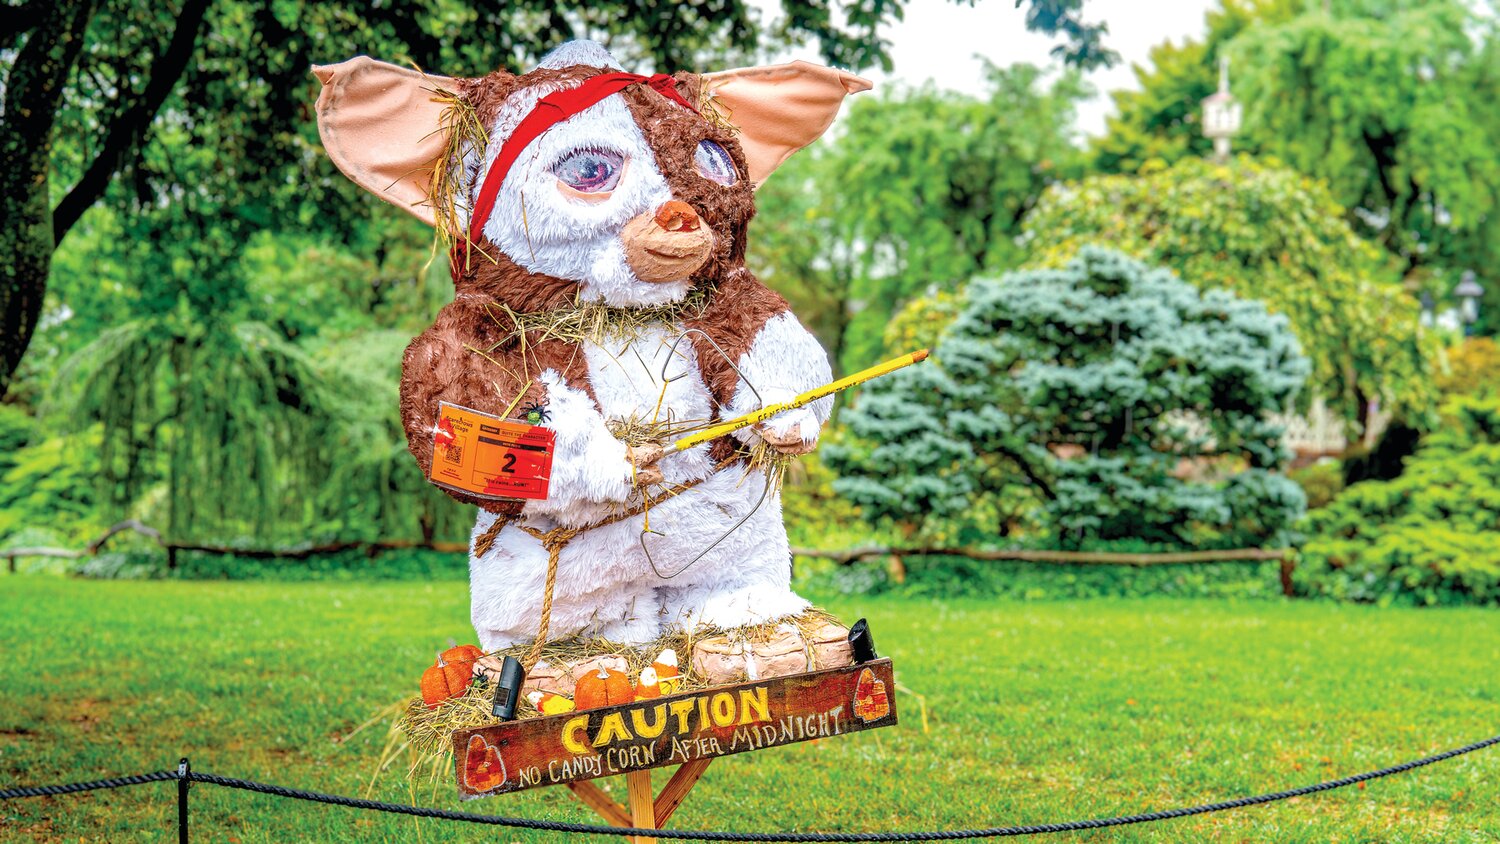 “Scarecrows in the Village,” the annual display of more than 100 scarecrows along the paths of Peddler’s Village, opens Sept. 1 and runs through Oct. 29.